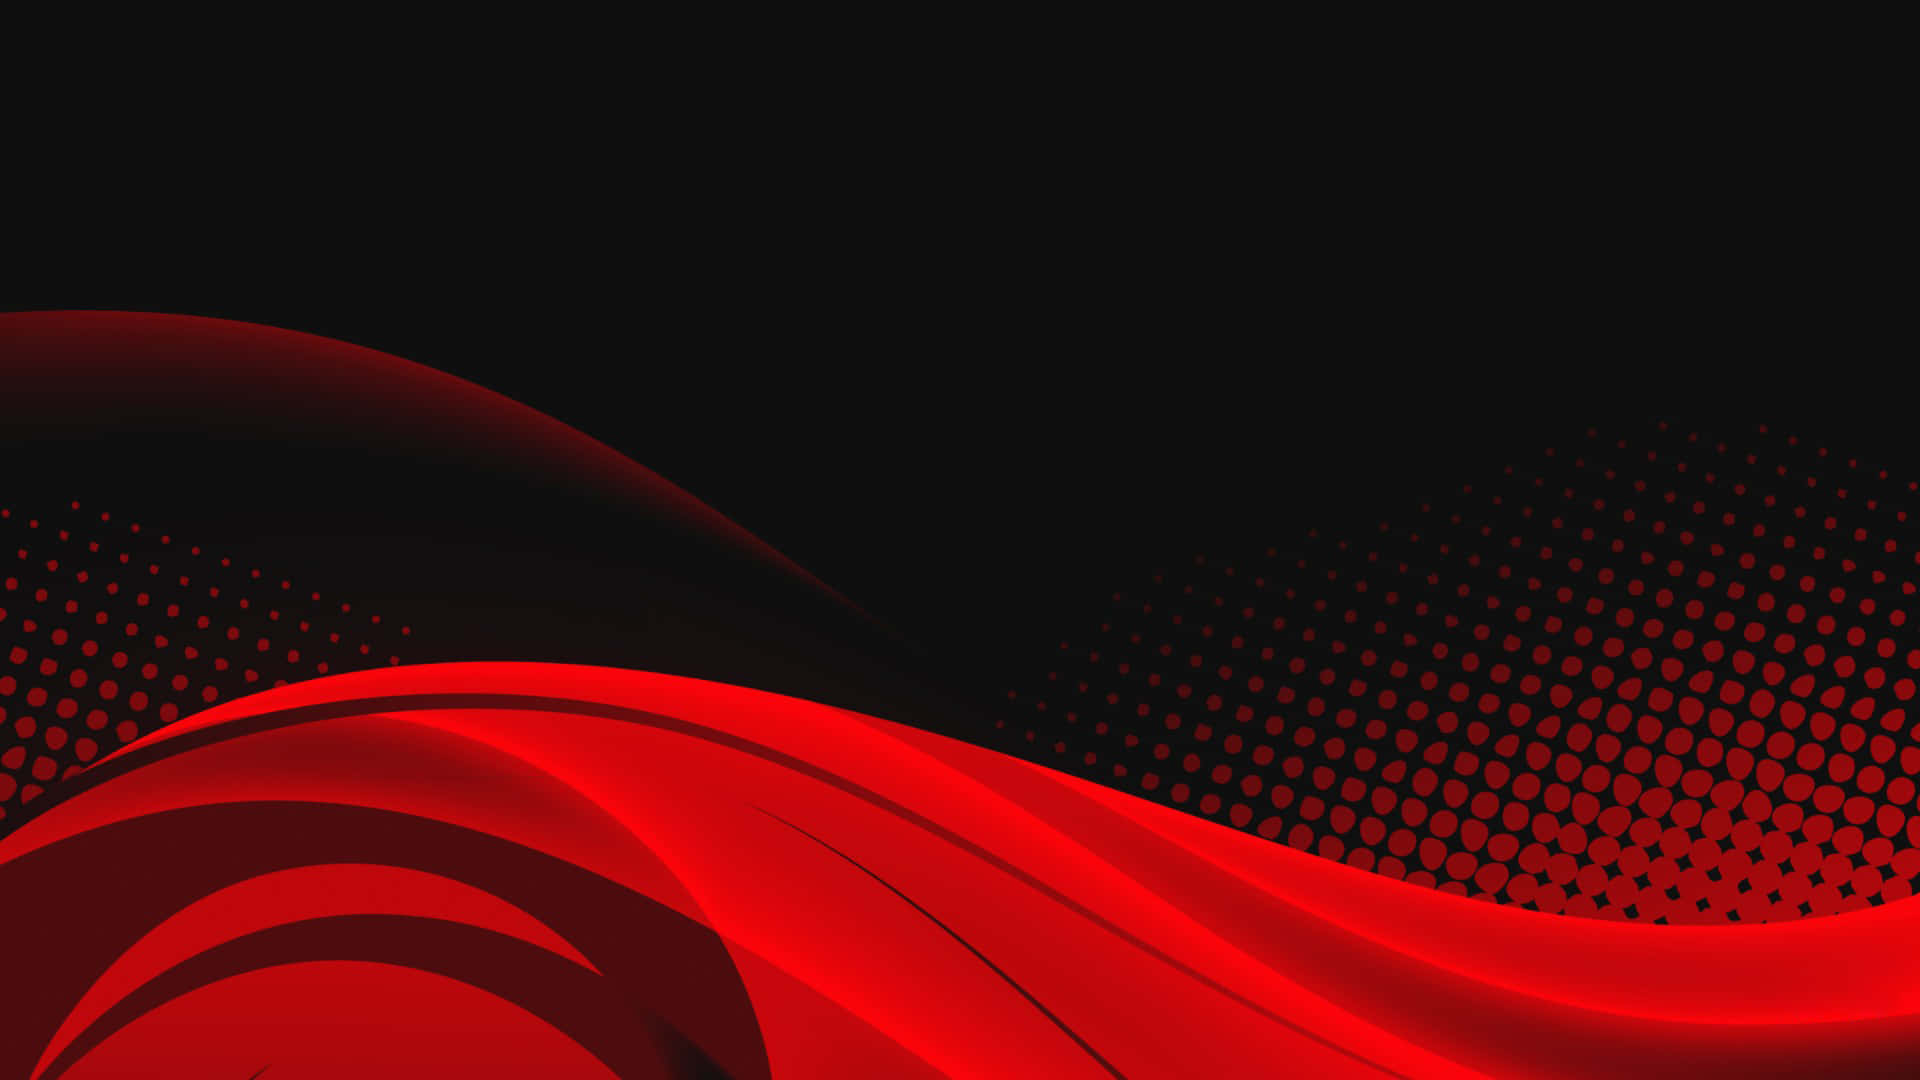 cool abstract backgrounds hd 1080p